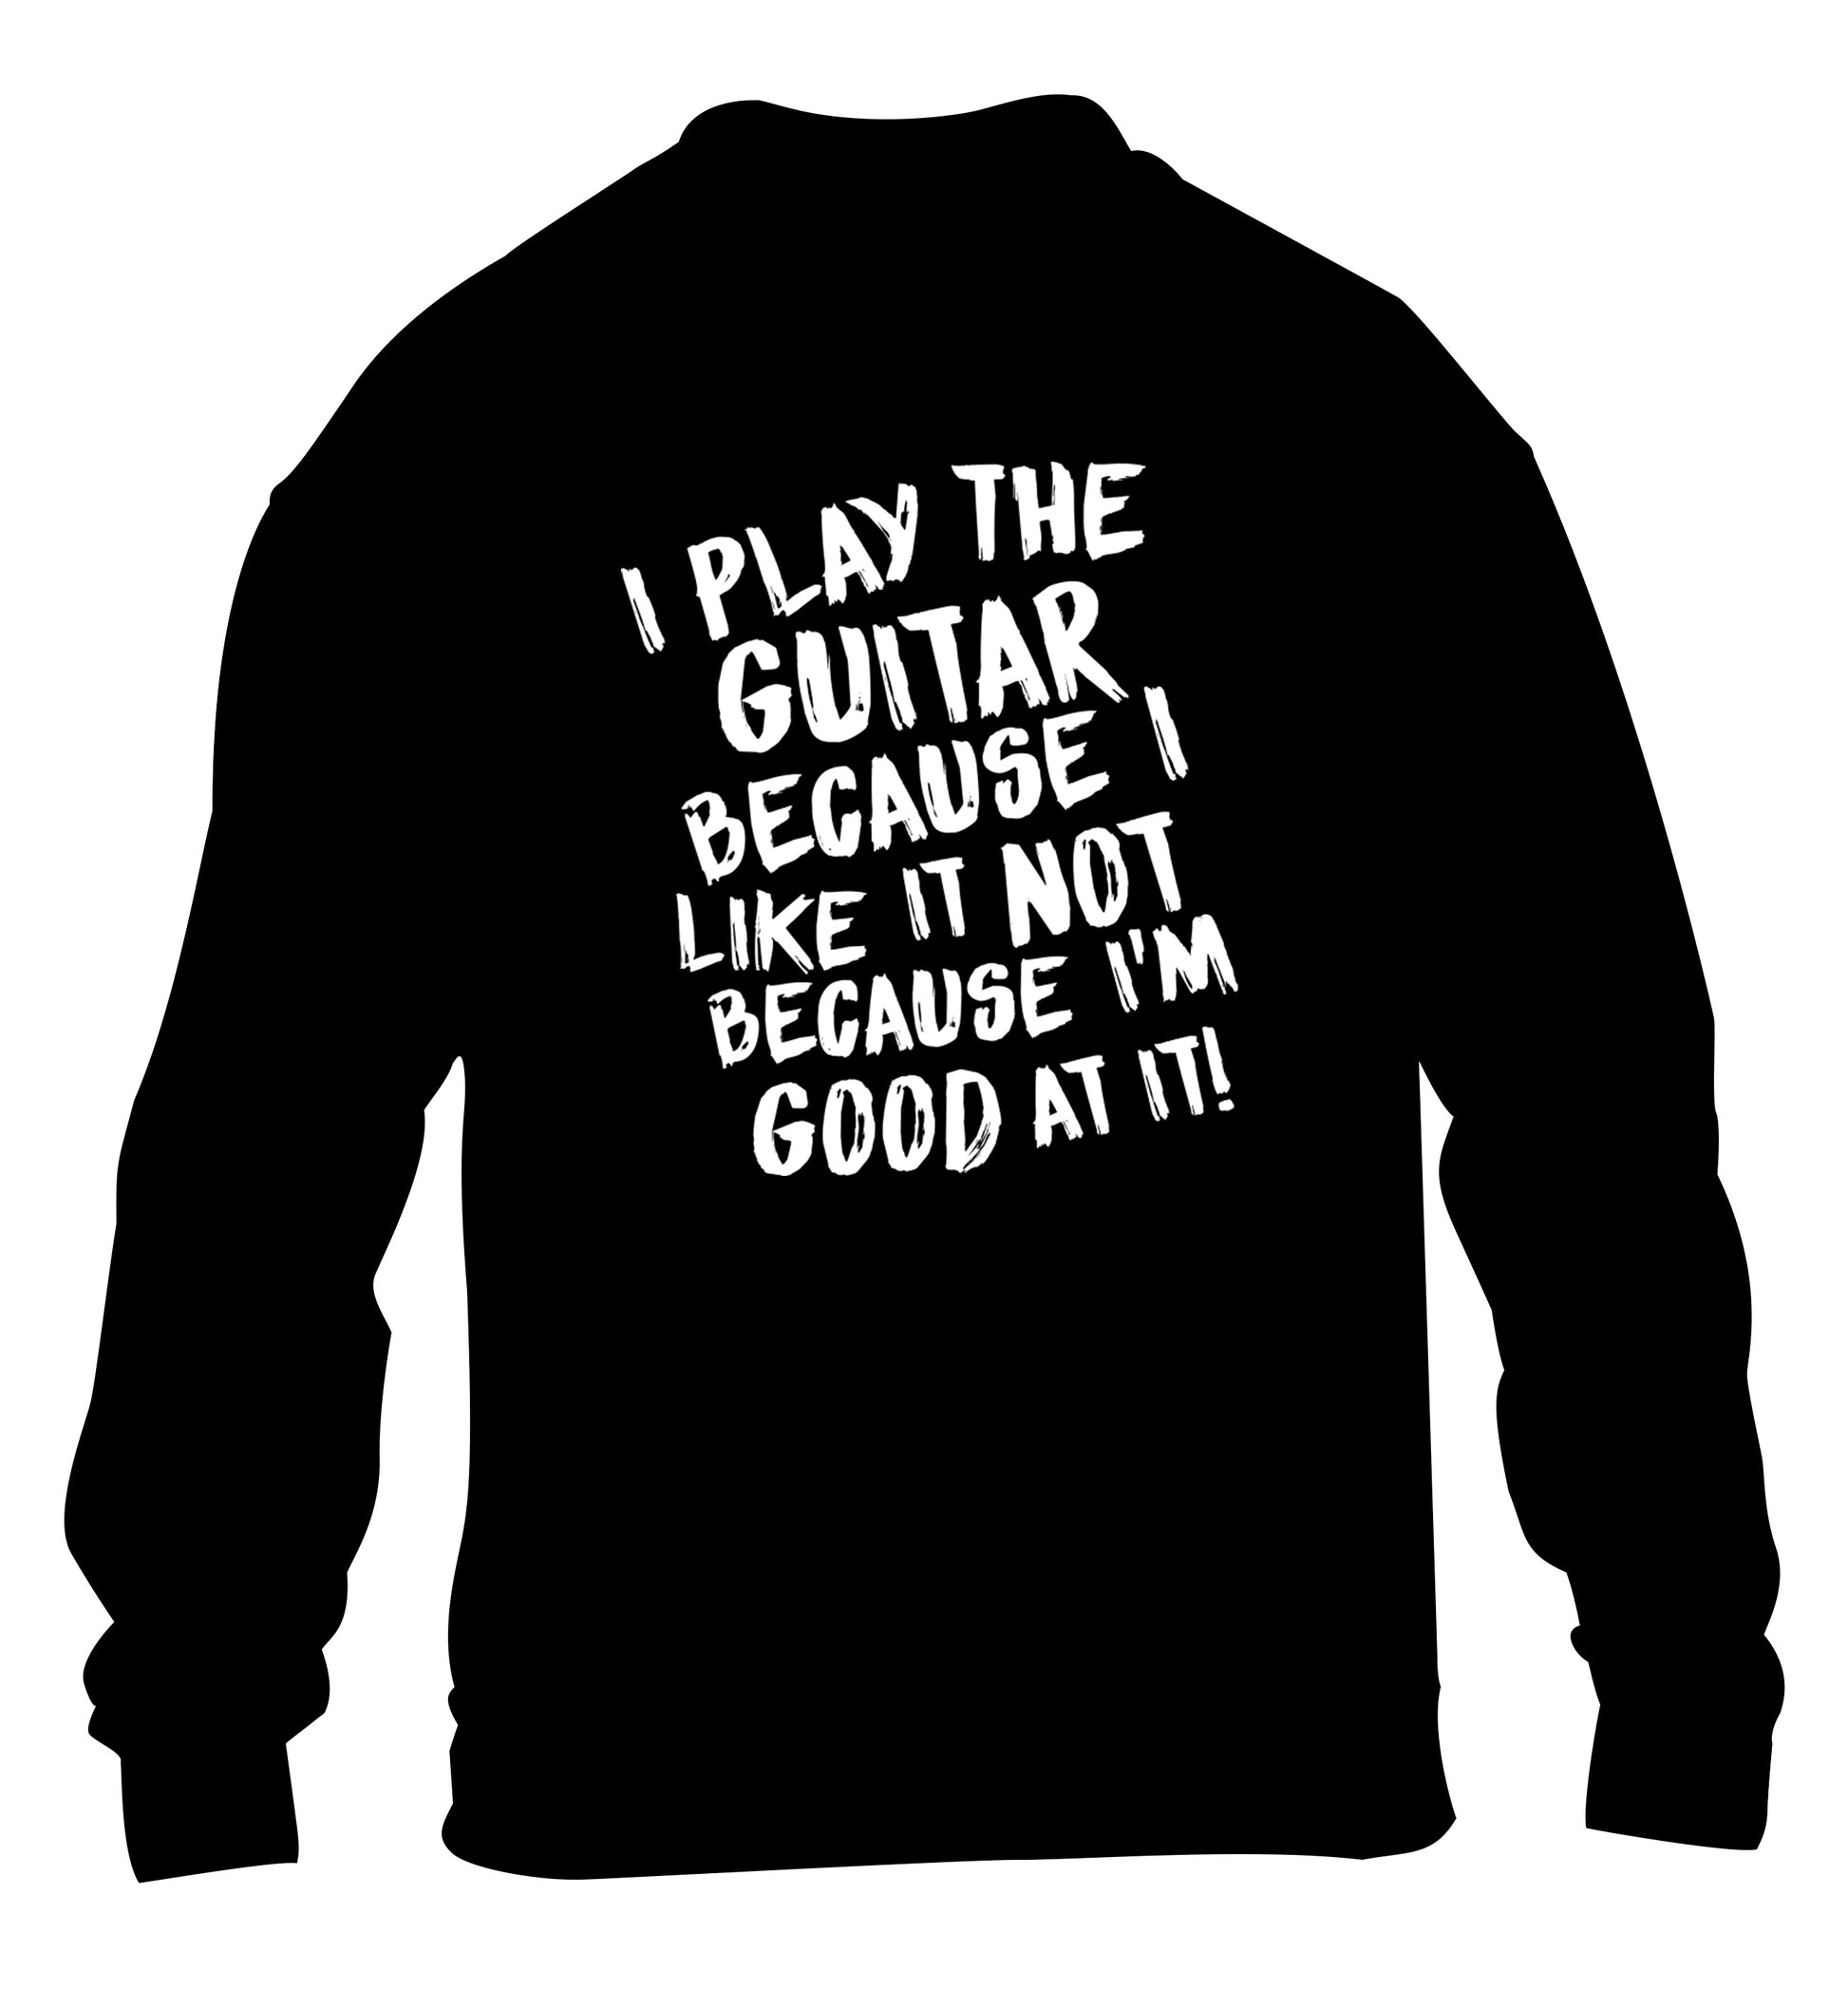 I play the guitar because I like it not because I'm good at it children's black sweater 12-14 Years